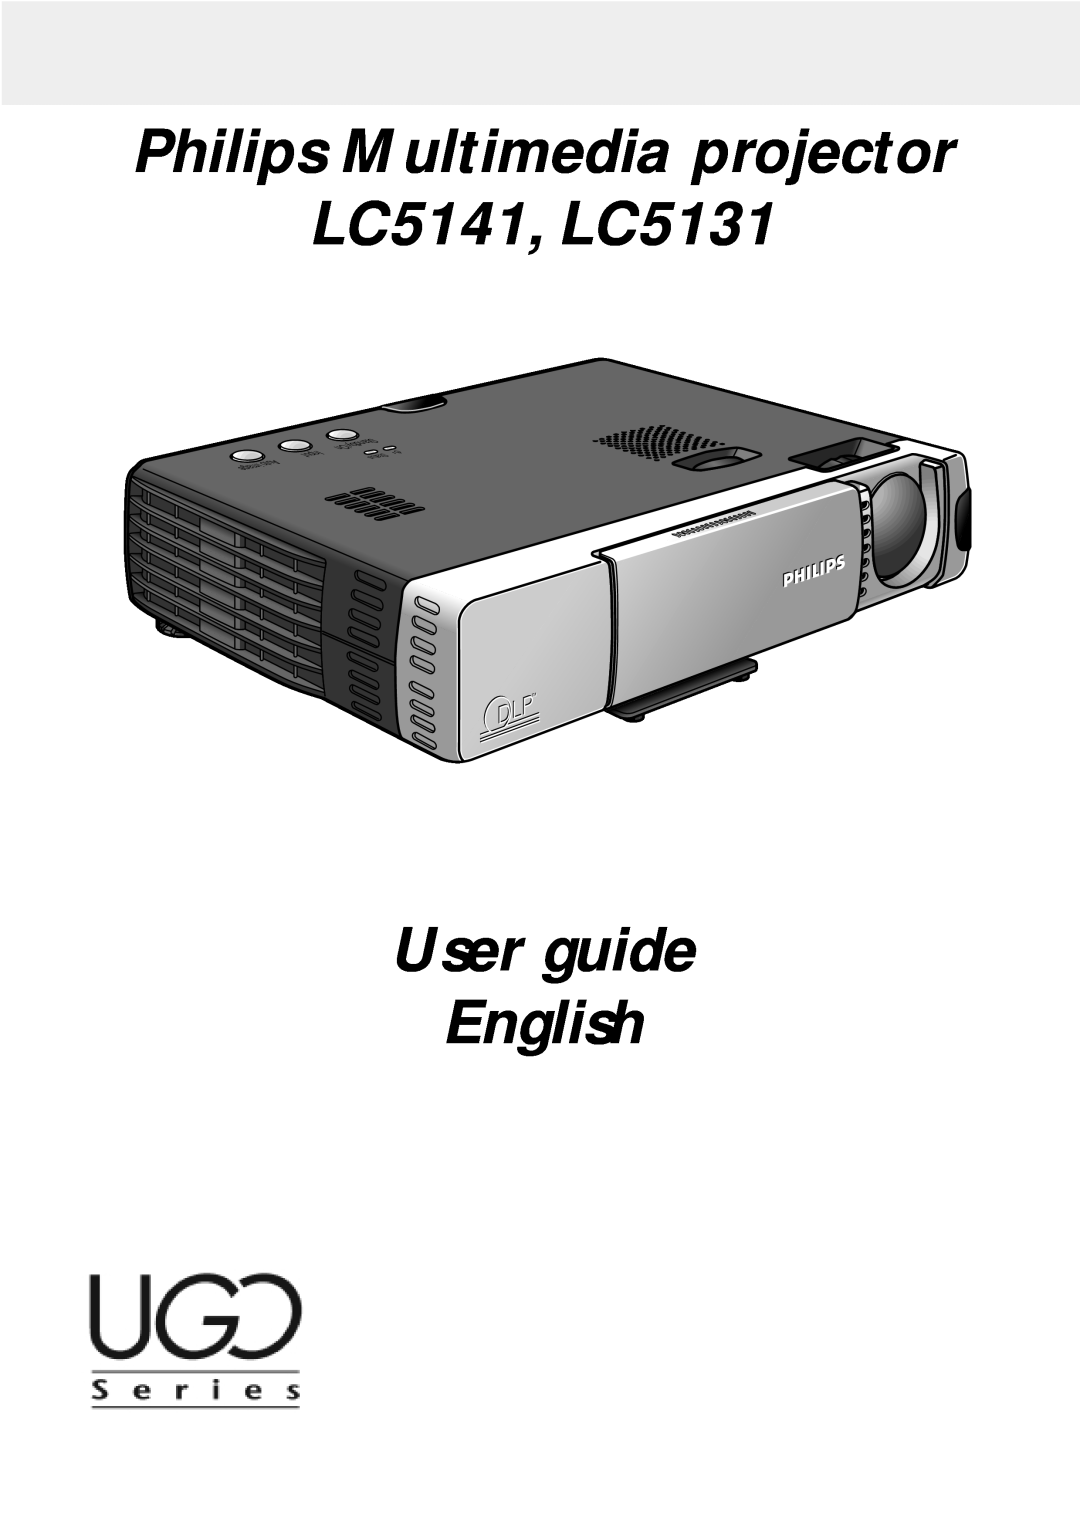 Philips manual Philips Multimedia projector LC5141, LC5131, User guide English, Auto, Input, Standby/On S ta tu s 